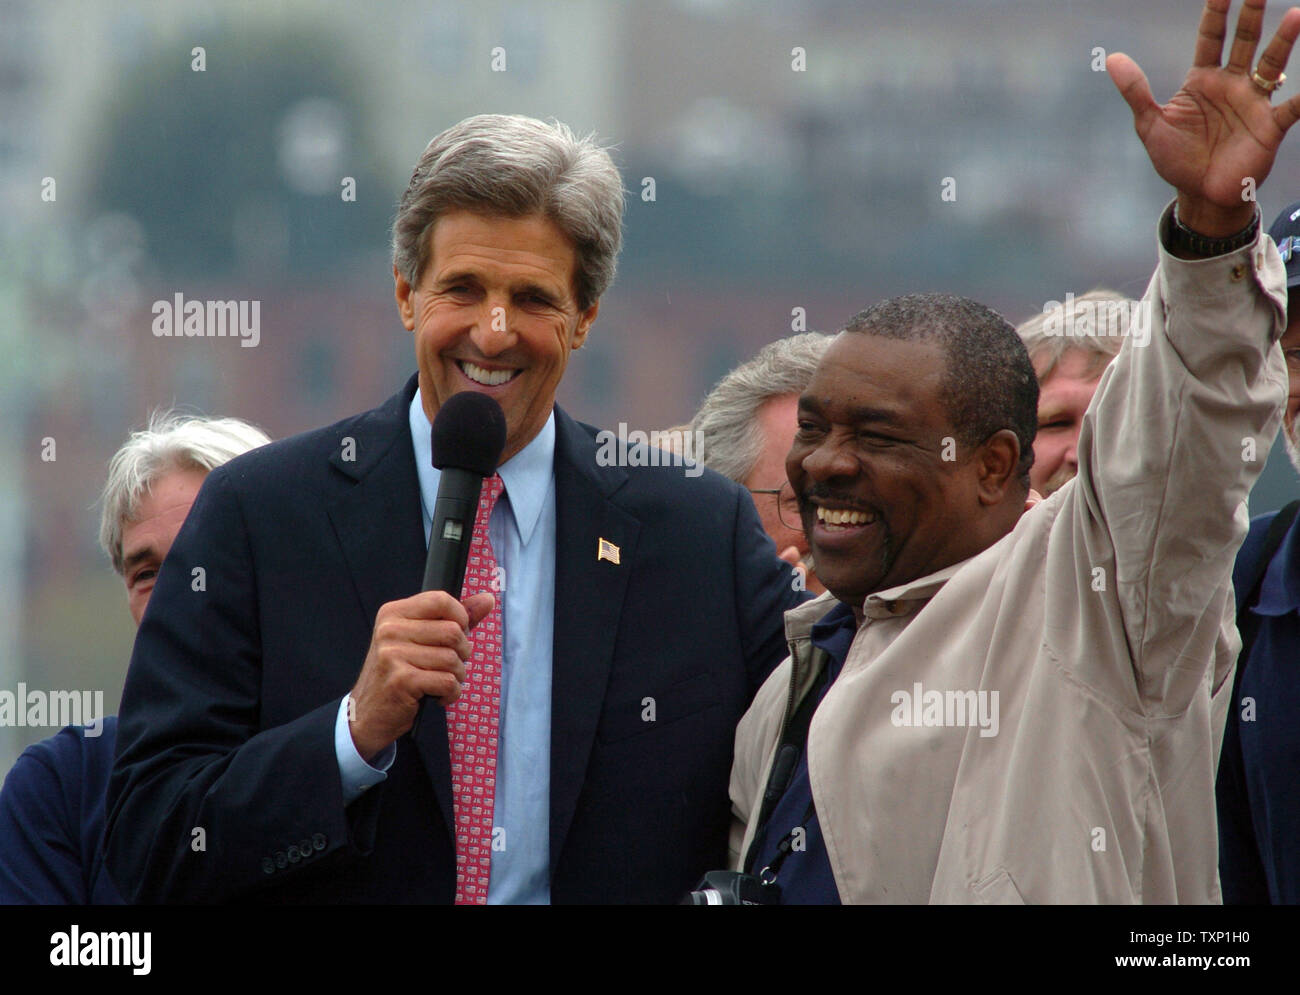 Democratic presidential hopeful John Kerry appears with Rev. David Alston and other members of his swift boat crew at a rally on July 28, 2004, in Boston. Kerry arrived this morning to his home state, where he will be formally nominated as the Democratic Presidential candidate at the Democratic National Convention on July 29.    (UPI Photo/Greg Whitesell) Stock Photo